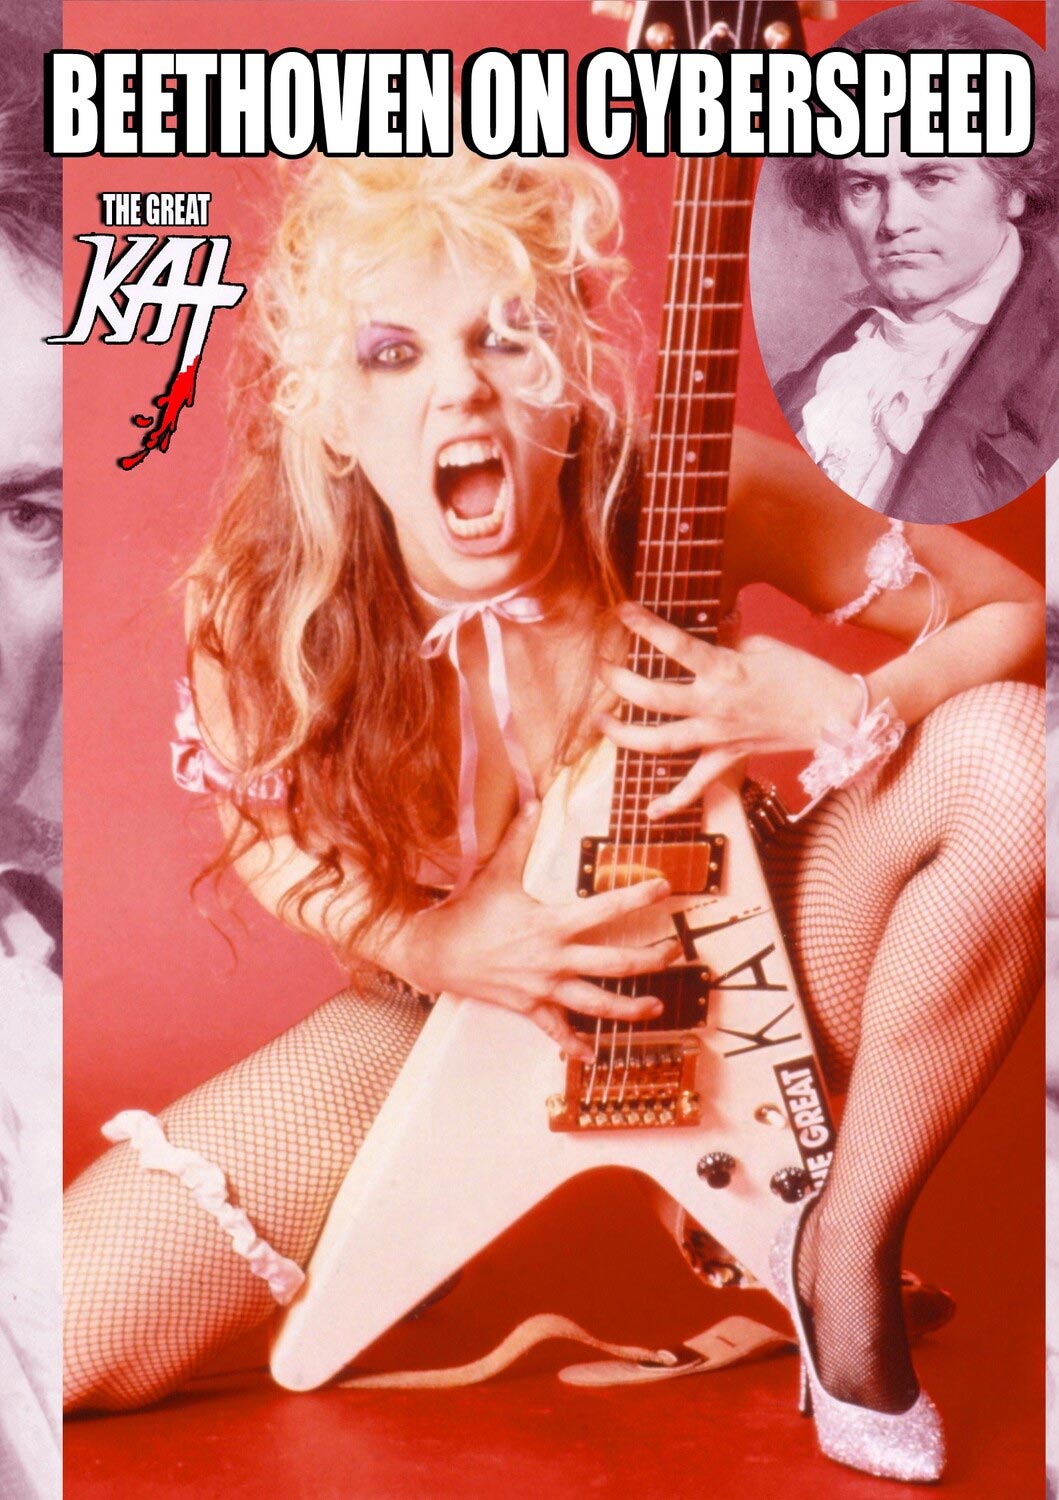 THE GREAT KAT - Beethoven on Cyberspeed cover 